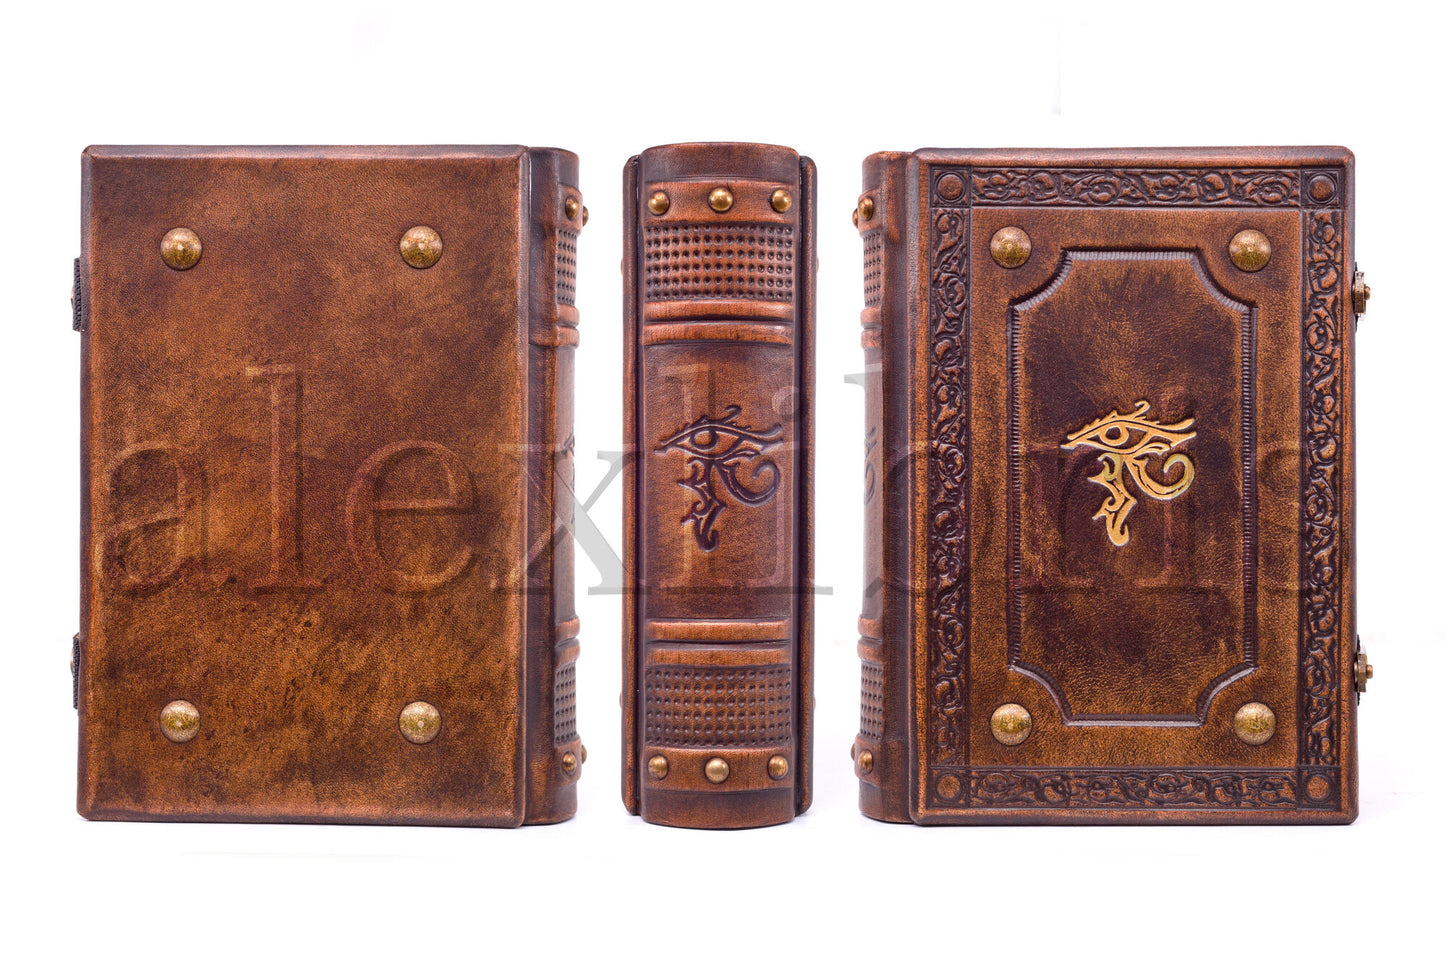 Horus Eye Leather Journal: Large 7.5 x 10 Inches, 600 Blank Pages - Unlock the Secrets of Magic and Esoteric Wisdom with the Powerful Horus Eye